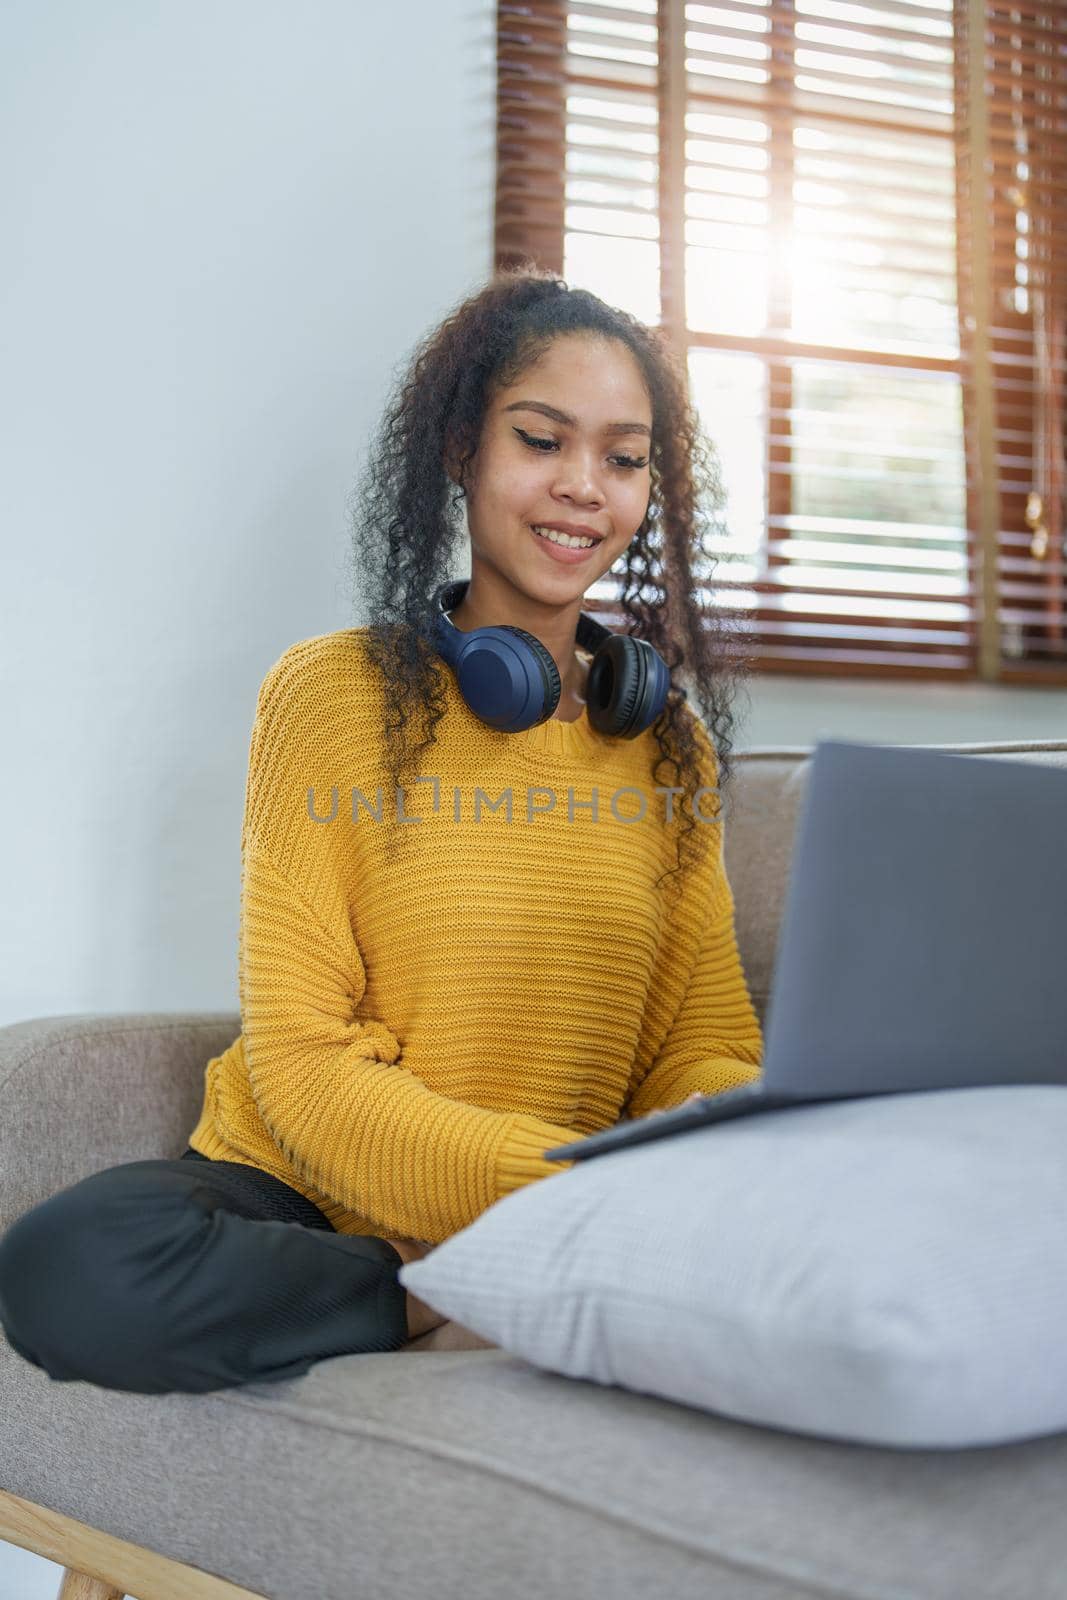 Portrait of an African American sitting on the sofa wearing on-ear headphones and using a computer at home by Manastrong